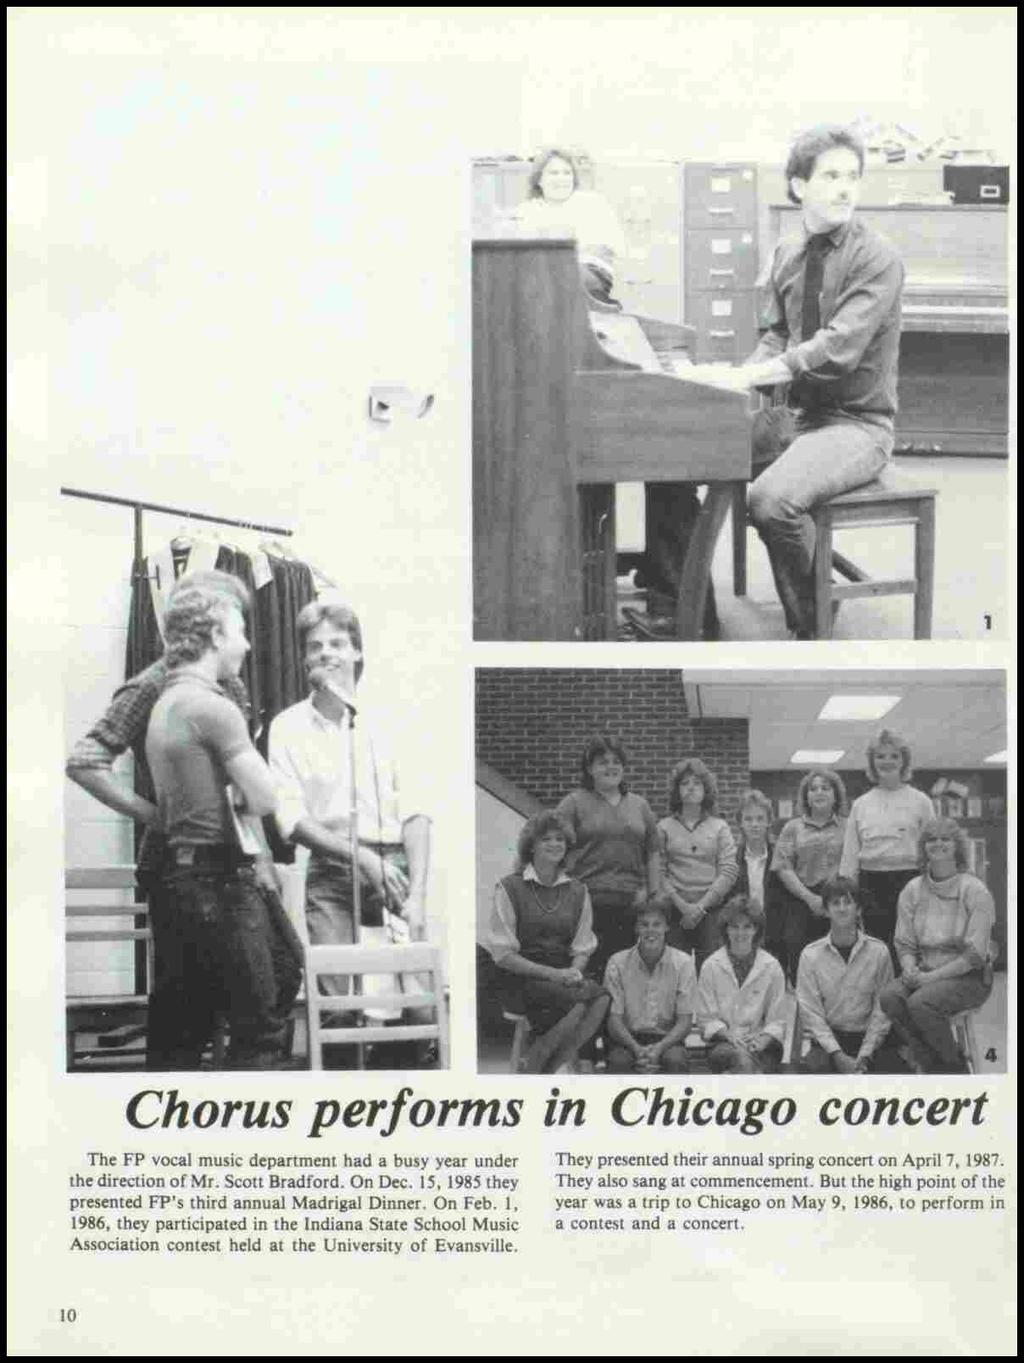 Chorus performs in Chicago concert The FP vocal music department had a busy year under the direction of Mr. Scott Bradford. On Dec. 15, 1985 they presented FP's third annual Madrigal Dinner. On Feb.